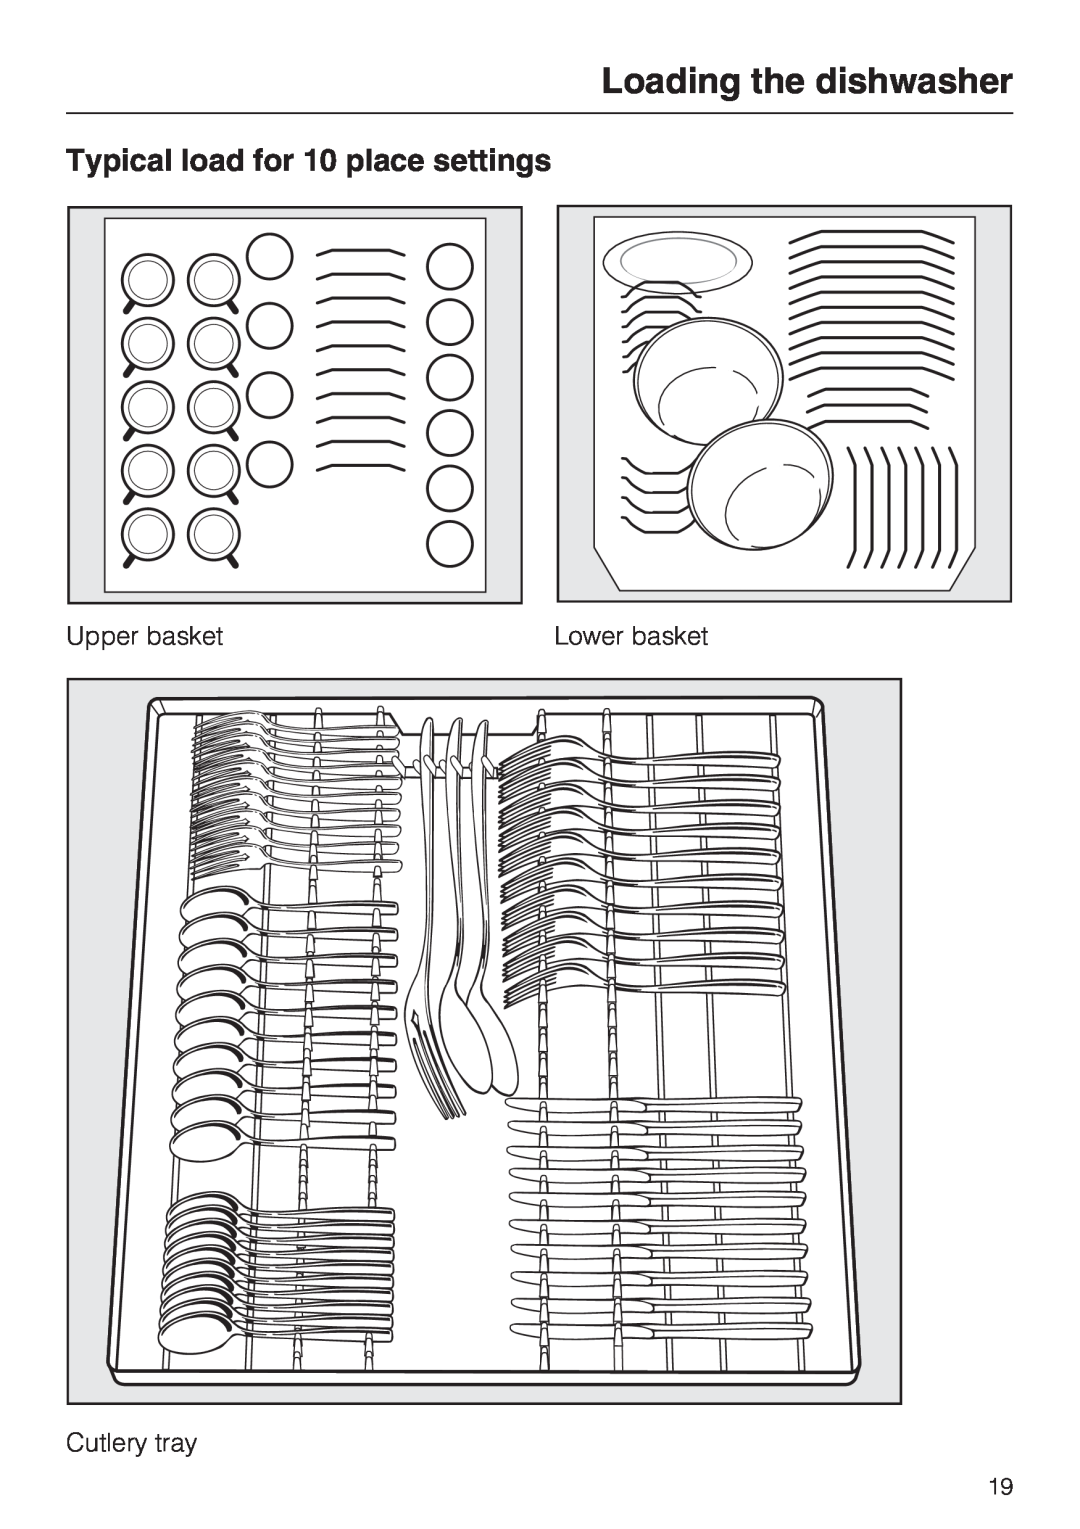 Miele G 5575, G 5570 Typical load for 10 place settings, Loading the dishwasher, Upper basket, Lower basket, Cutlery tray 